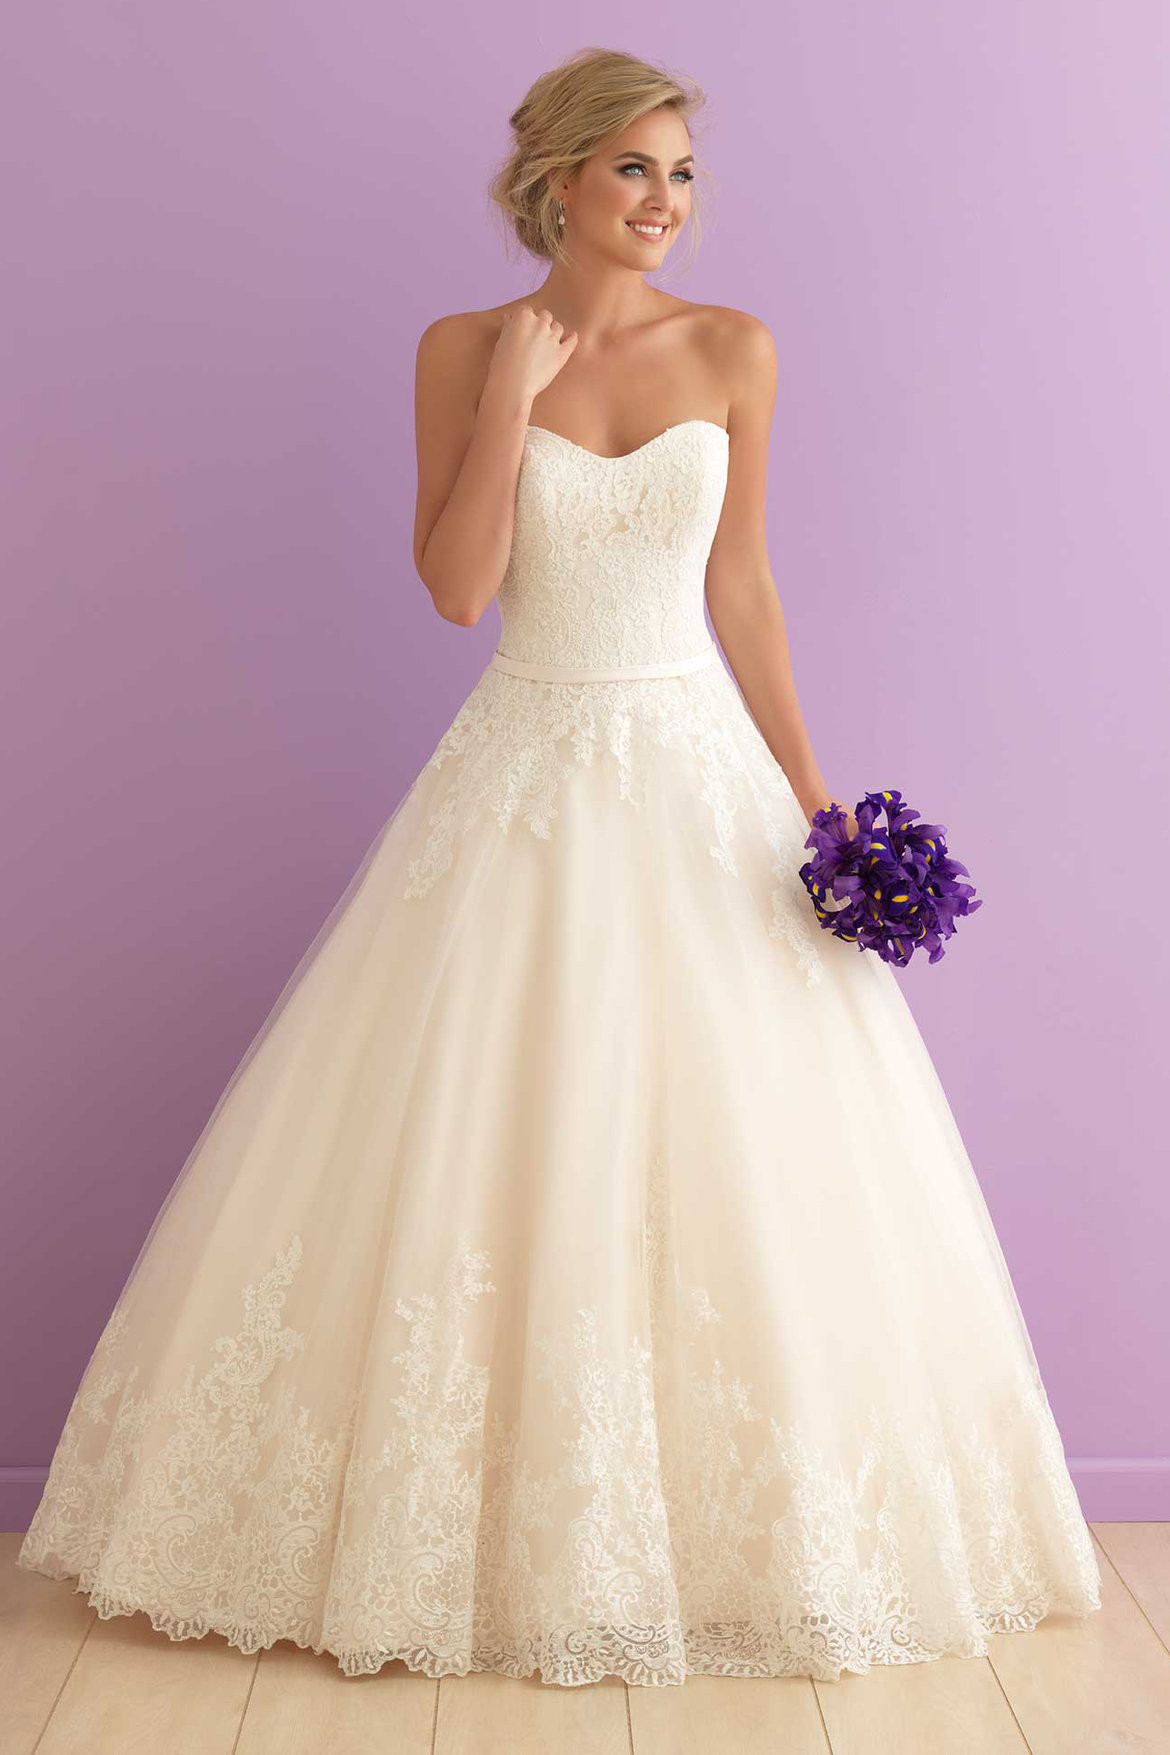 Popular Wedding Dresses
 The 25 Most Popular Wedding Gowns of 2015